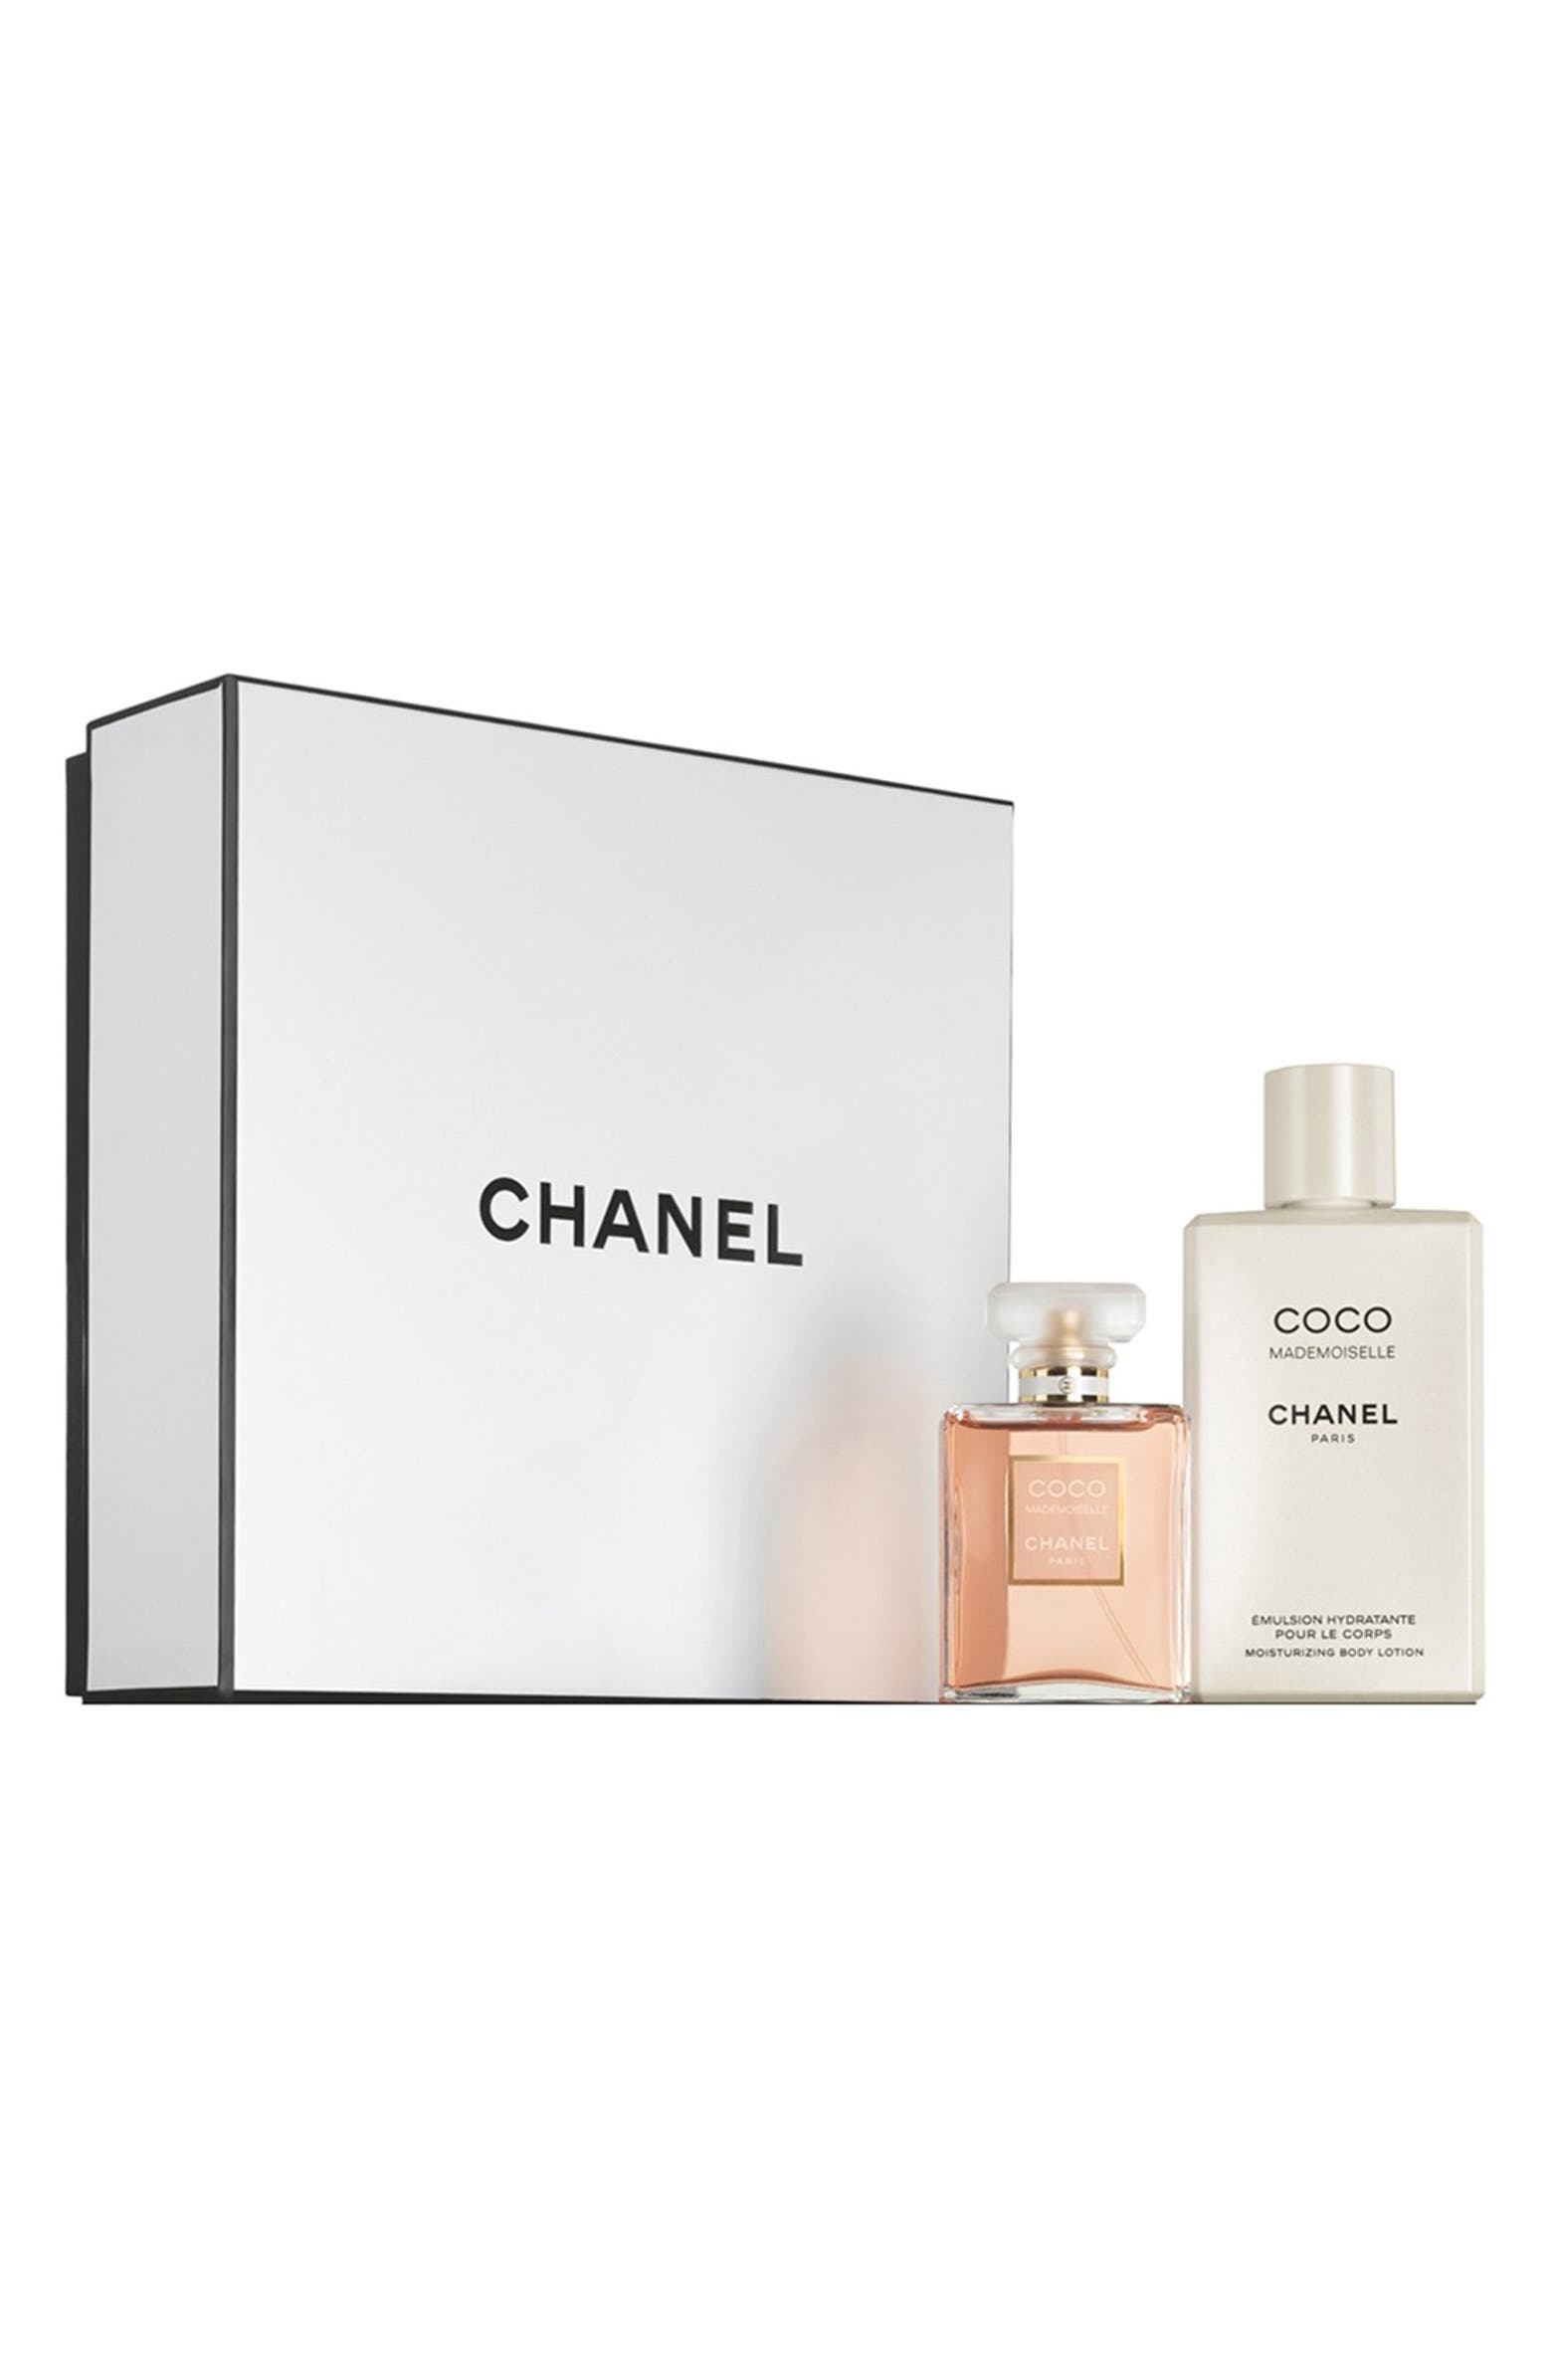 CHANEL COCO MADEMOISELLE Duo Set Nordstrom